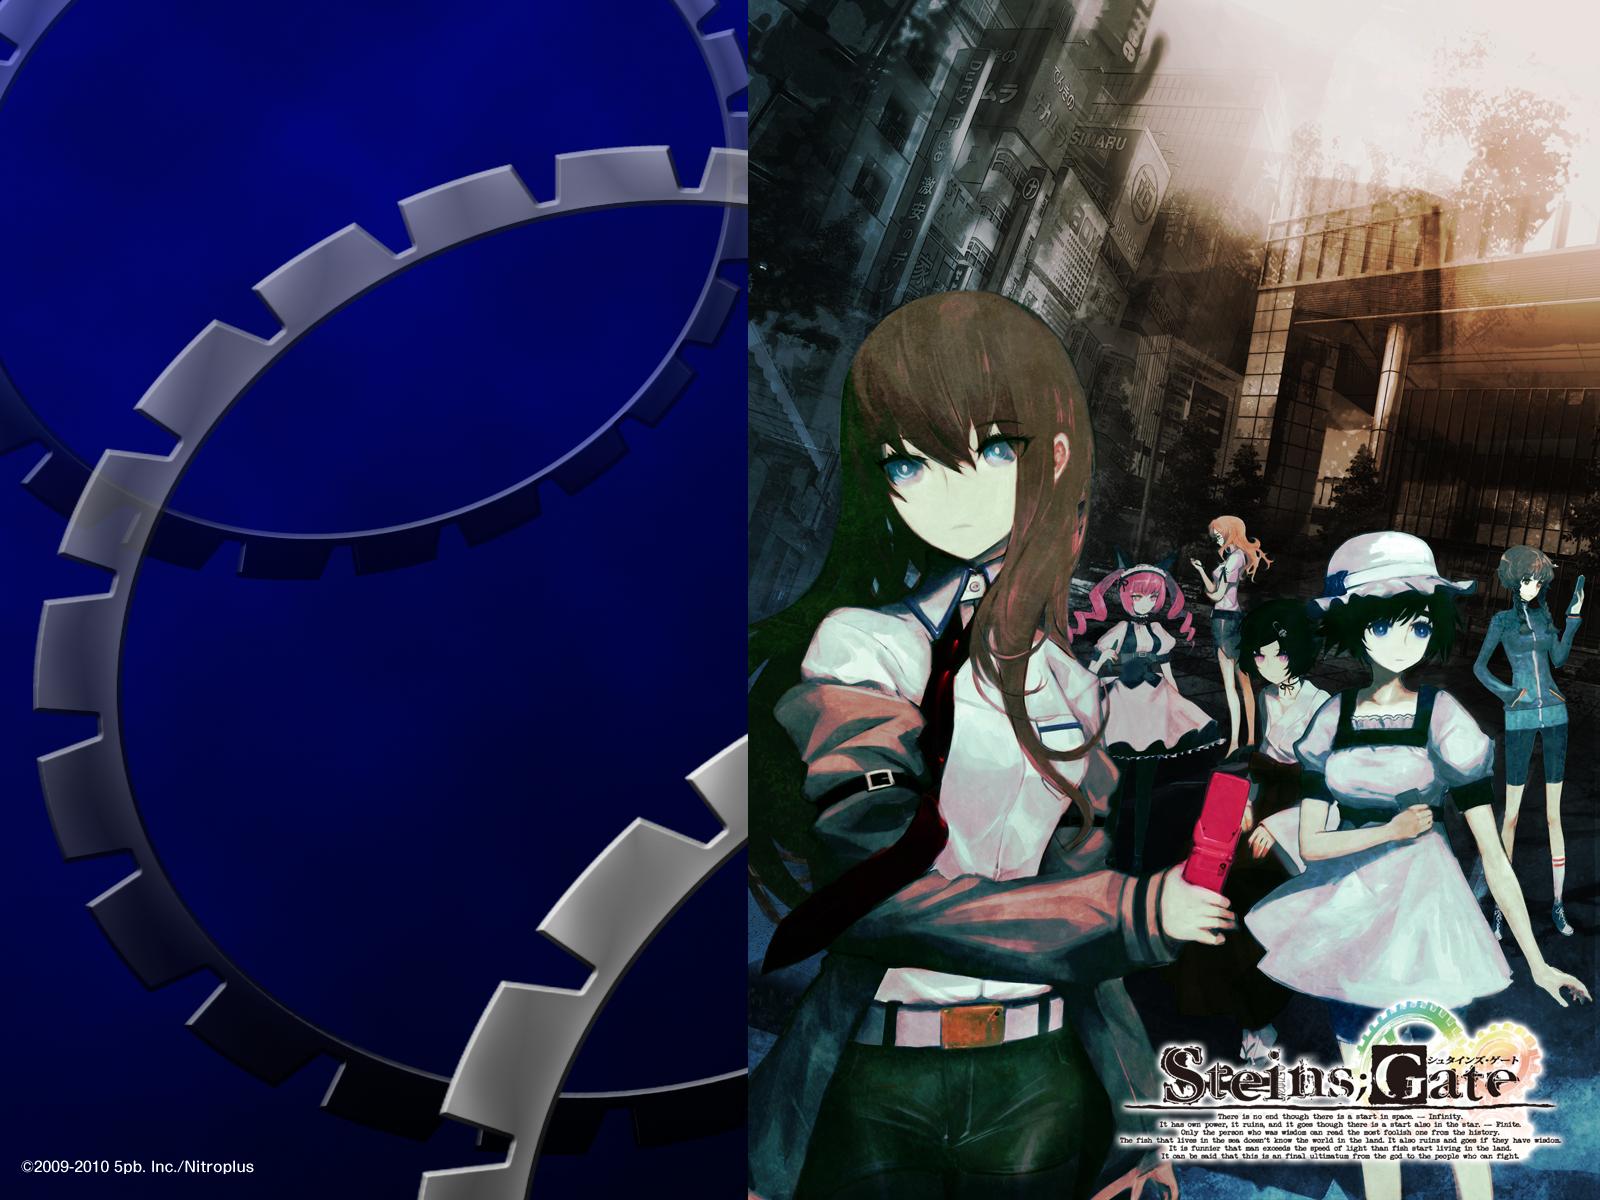 Free Download Steinsgate No0004 1600x10 For Your Desktop Mobile Tablet Explore 50 Gate Anime Wallpaper Steins Gate Wallpaper Gate Wallpaper Steins Gate Wallpaper 1080p